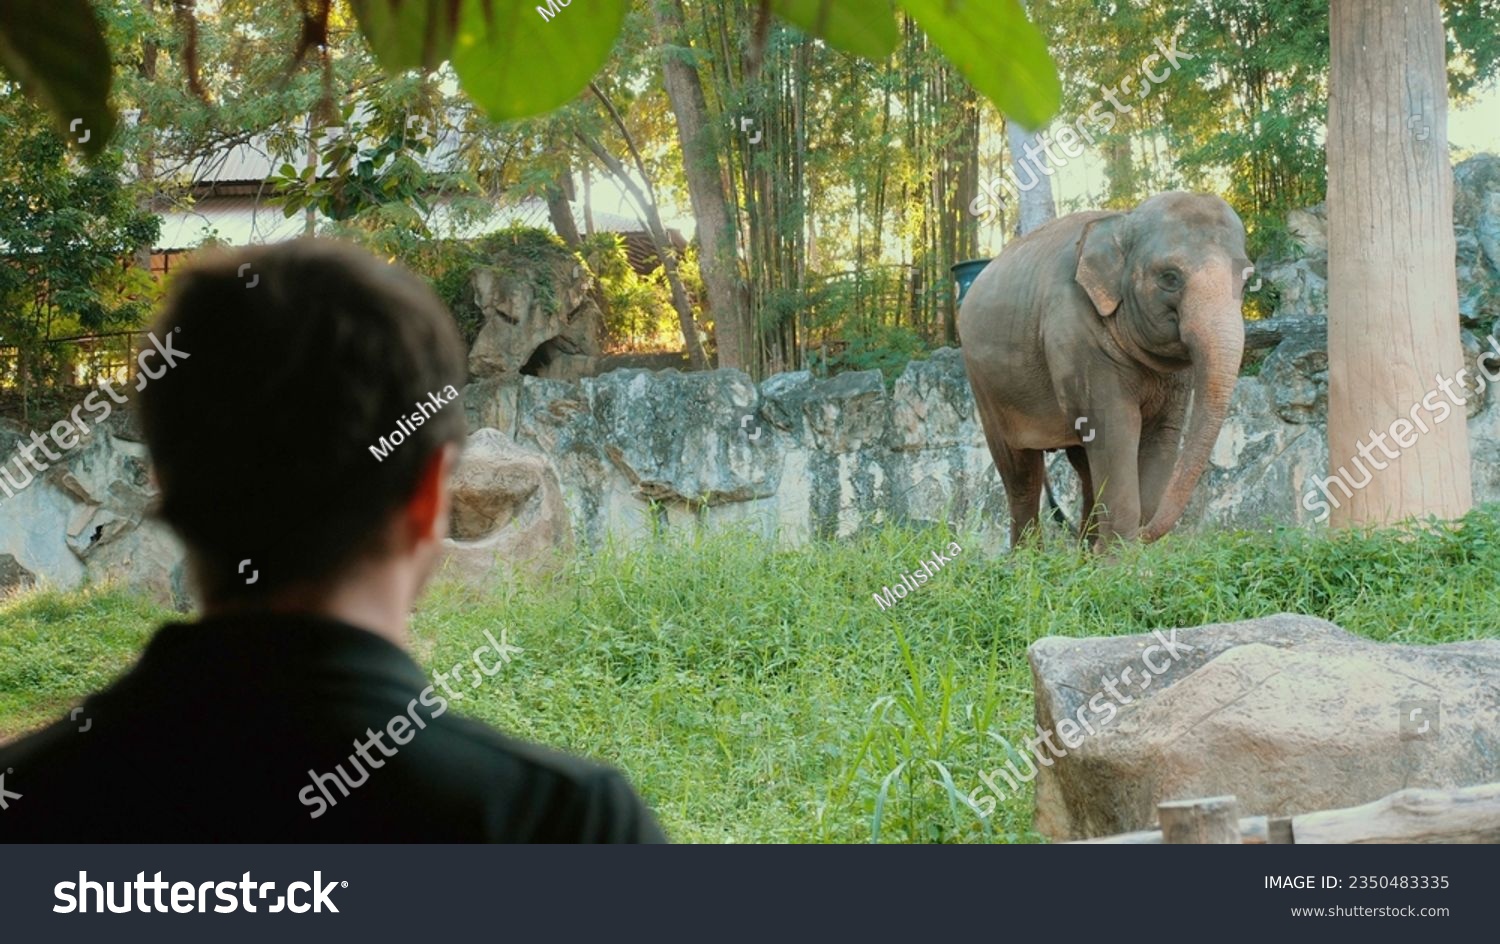 Man watching big elephant in open zoo. Male tourist on safari observing majestic mammal in its natural habitat. Concept of wildlife adventure in Thailand. #2350483335